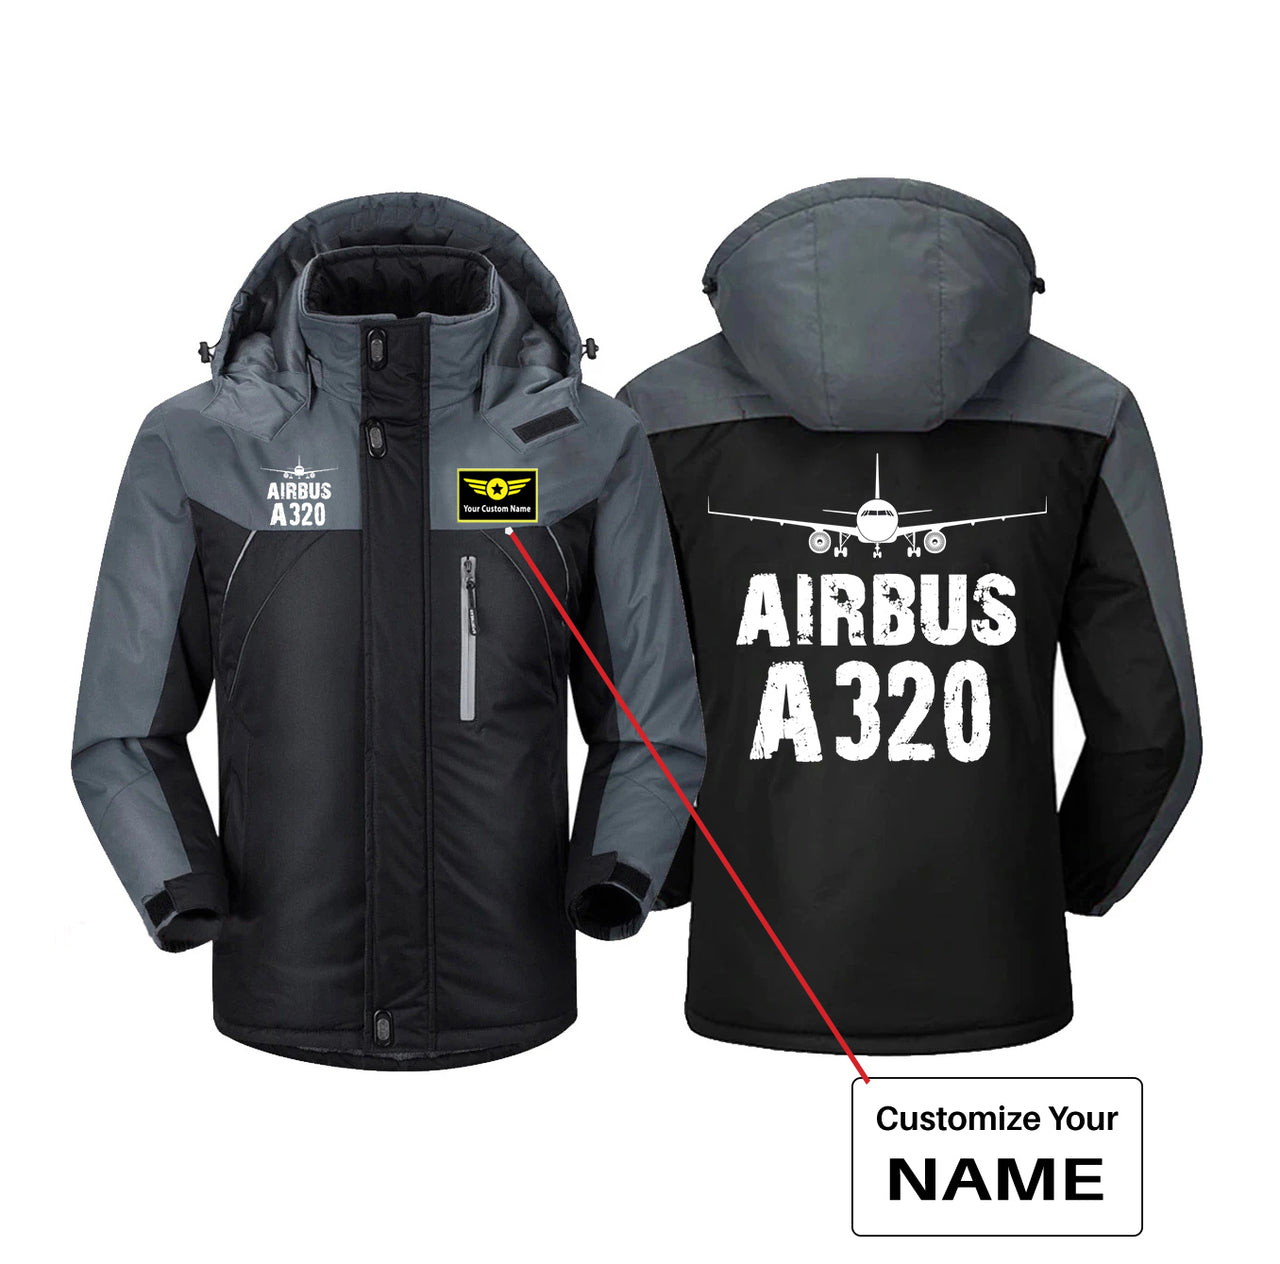 Airbus A320 & Plane Designed Thick Winter Jackets